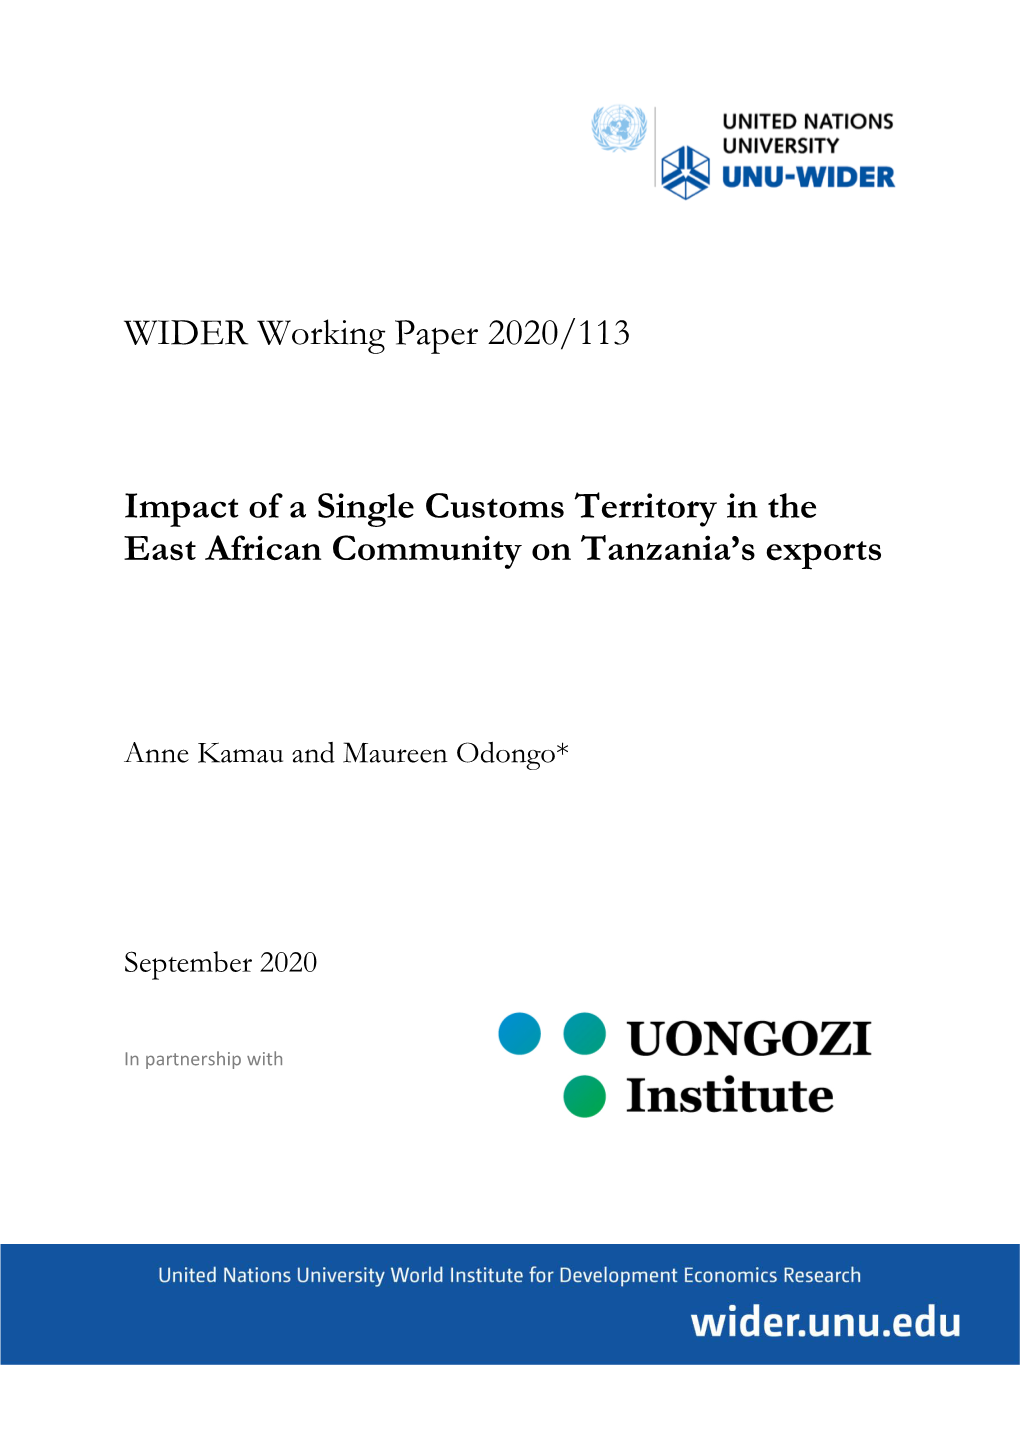 WIDER Working Paper 2020/113-Impact of a Single